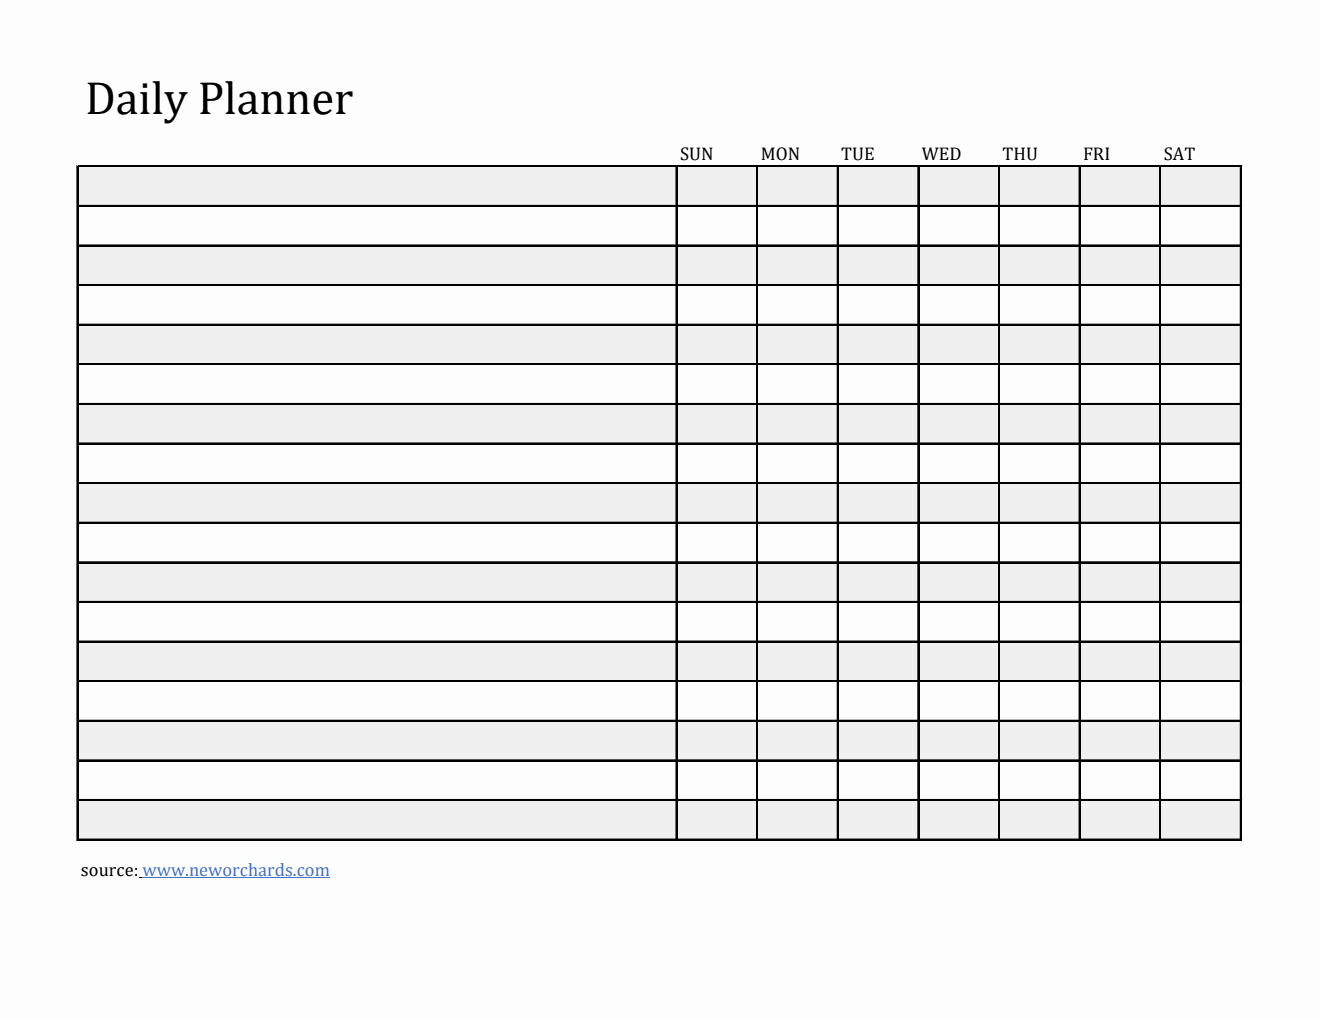 Daily Planner and Checklist Template in Excel (Striped)